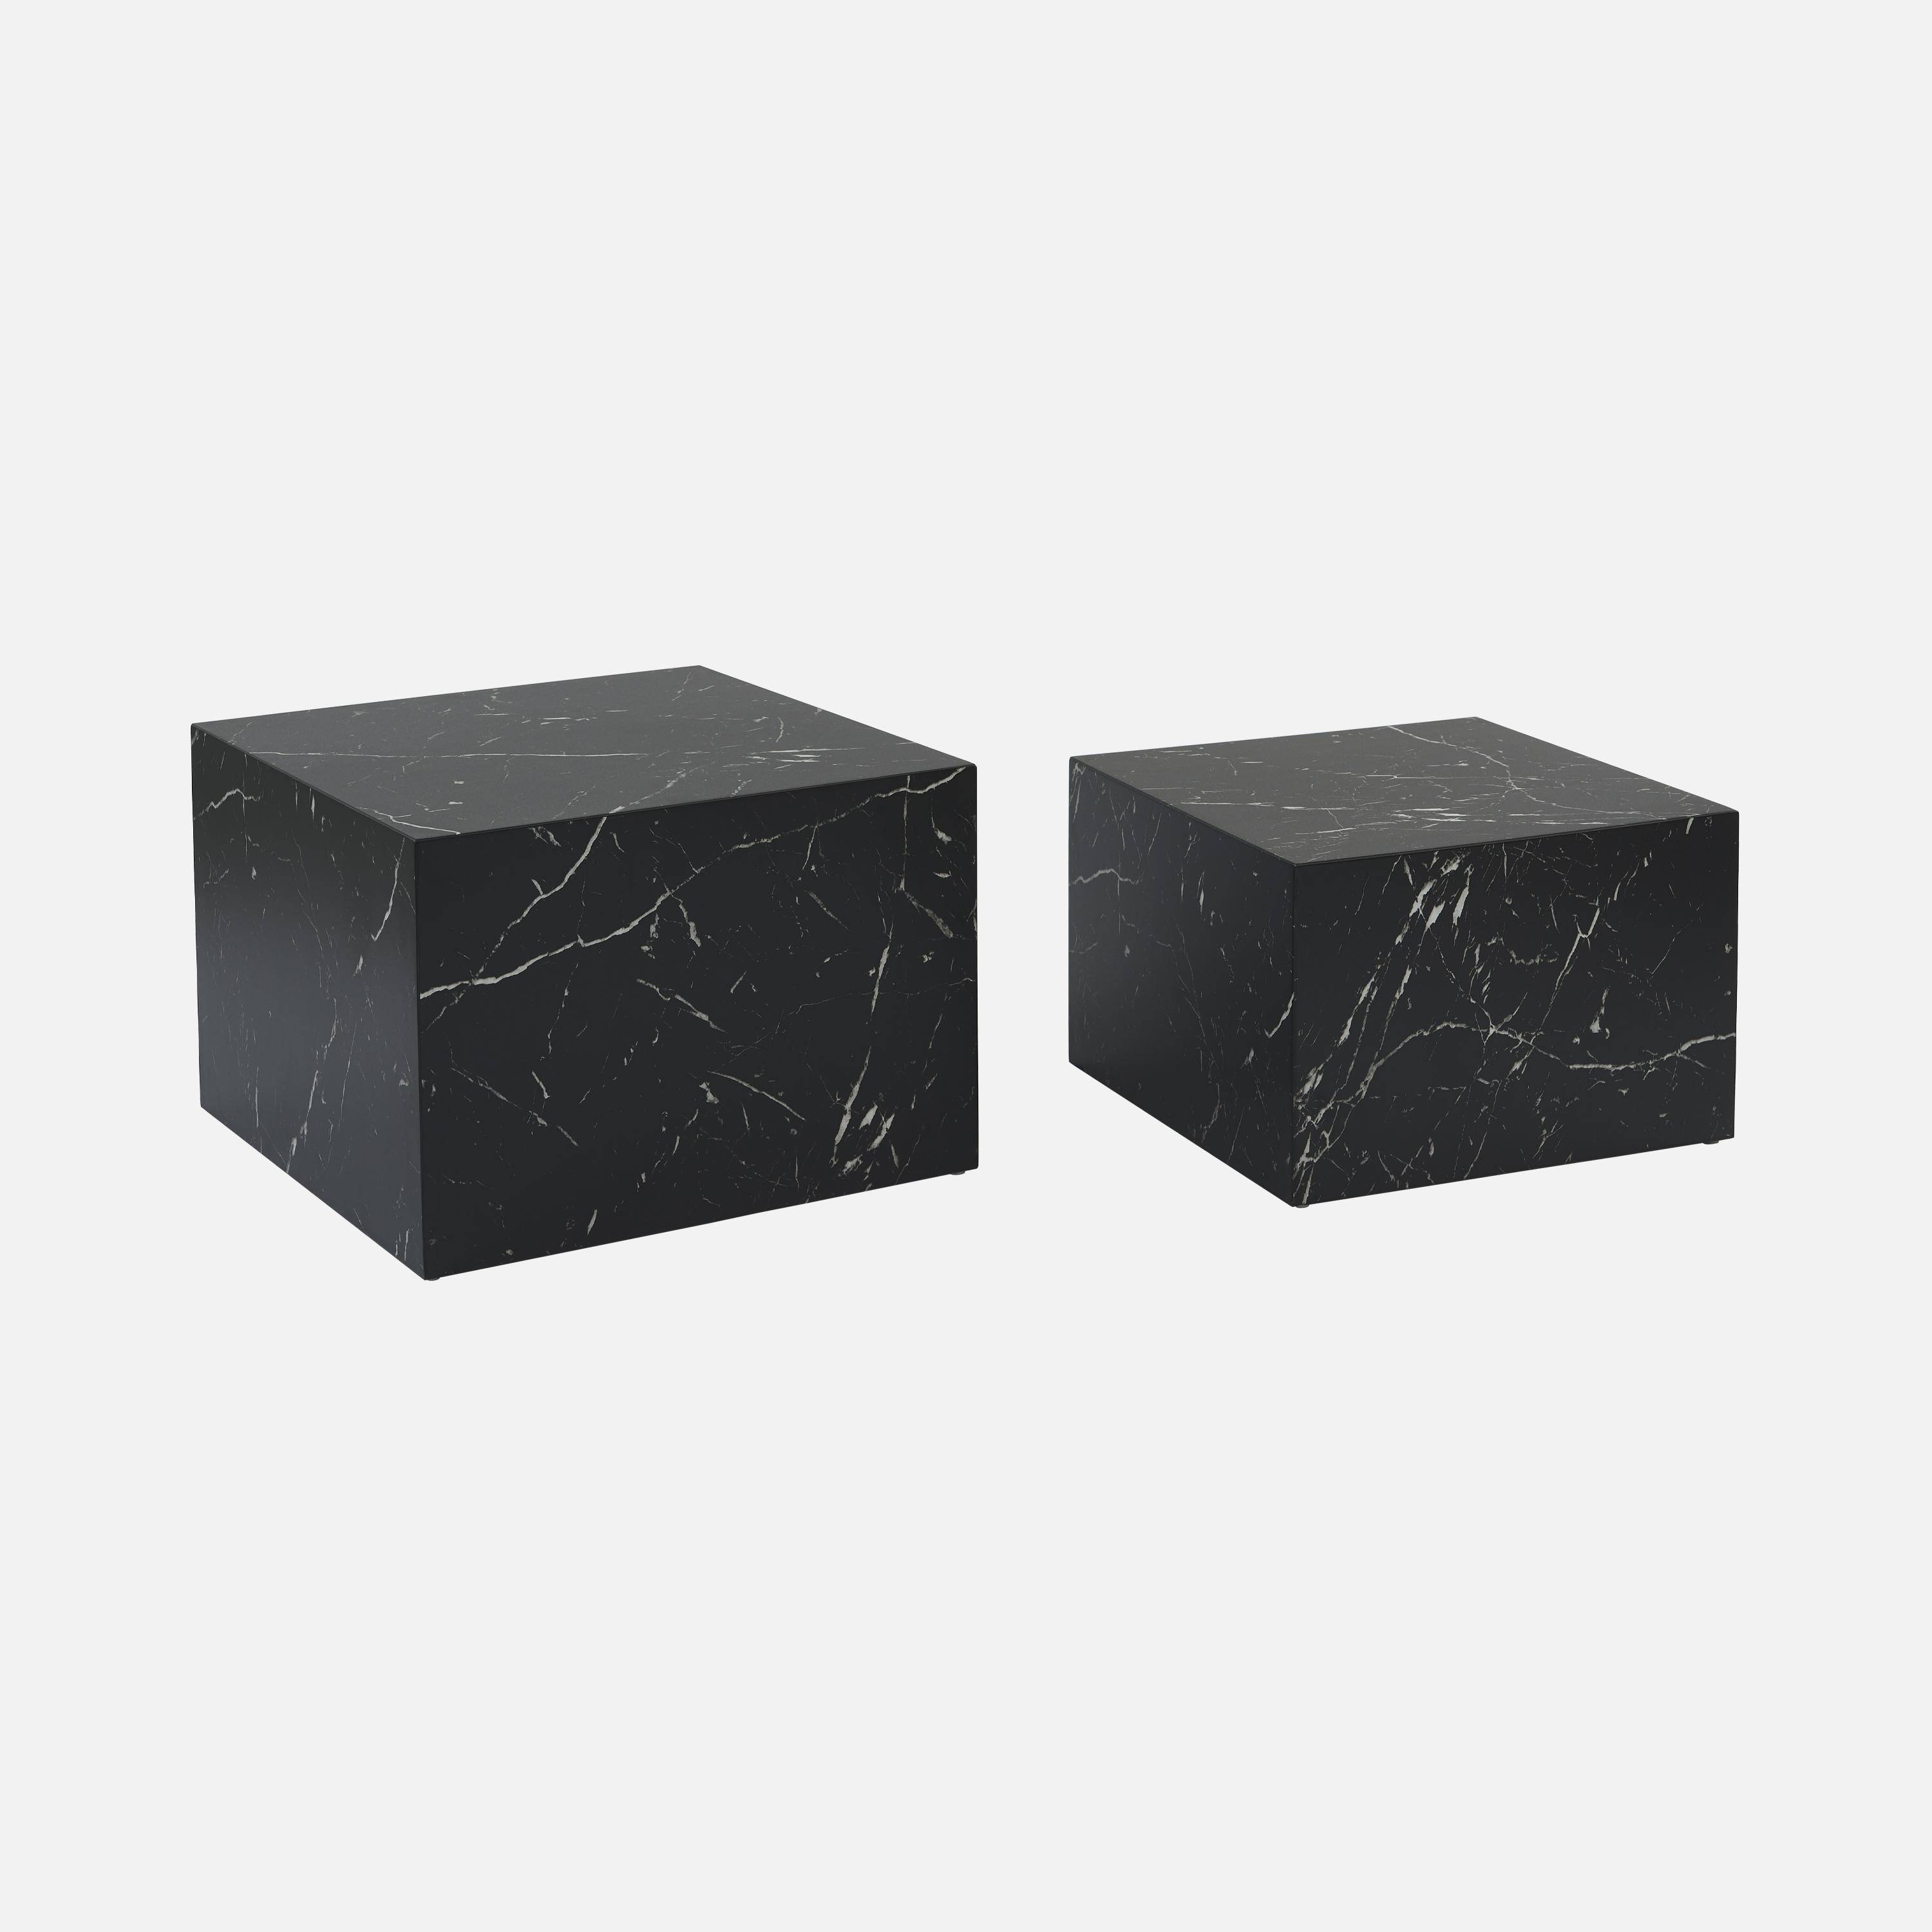 Set of 2 square coffee tables with marble effect, black, L50xW50xH33cm &  L58xW58xH40cm, Paros Photo5